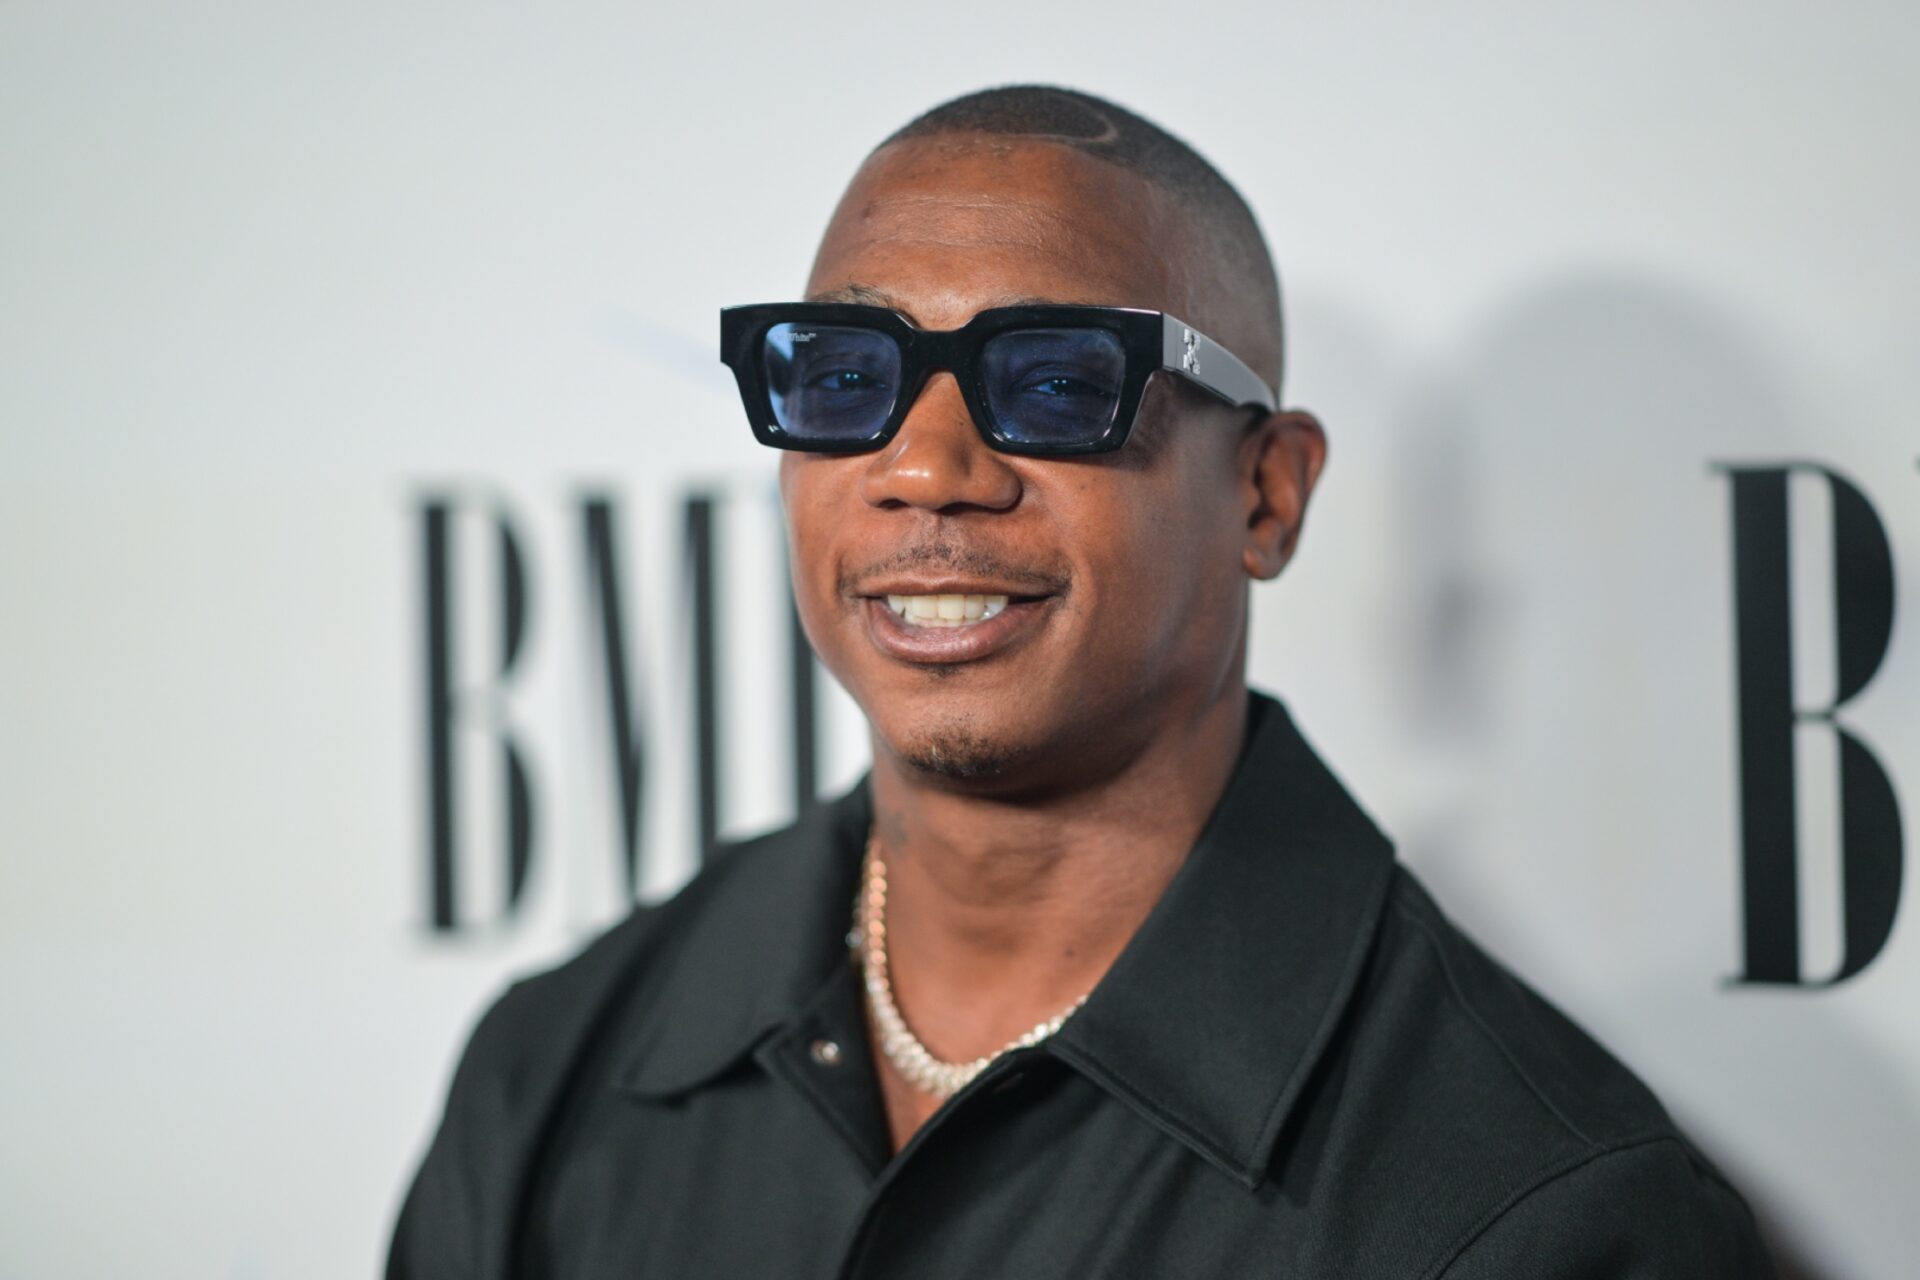 Uk Authorities Deny Ja Rule Entry Ahead Of Scheduled Tour, Yours Truly, Sasha Skare, February 29, 2024